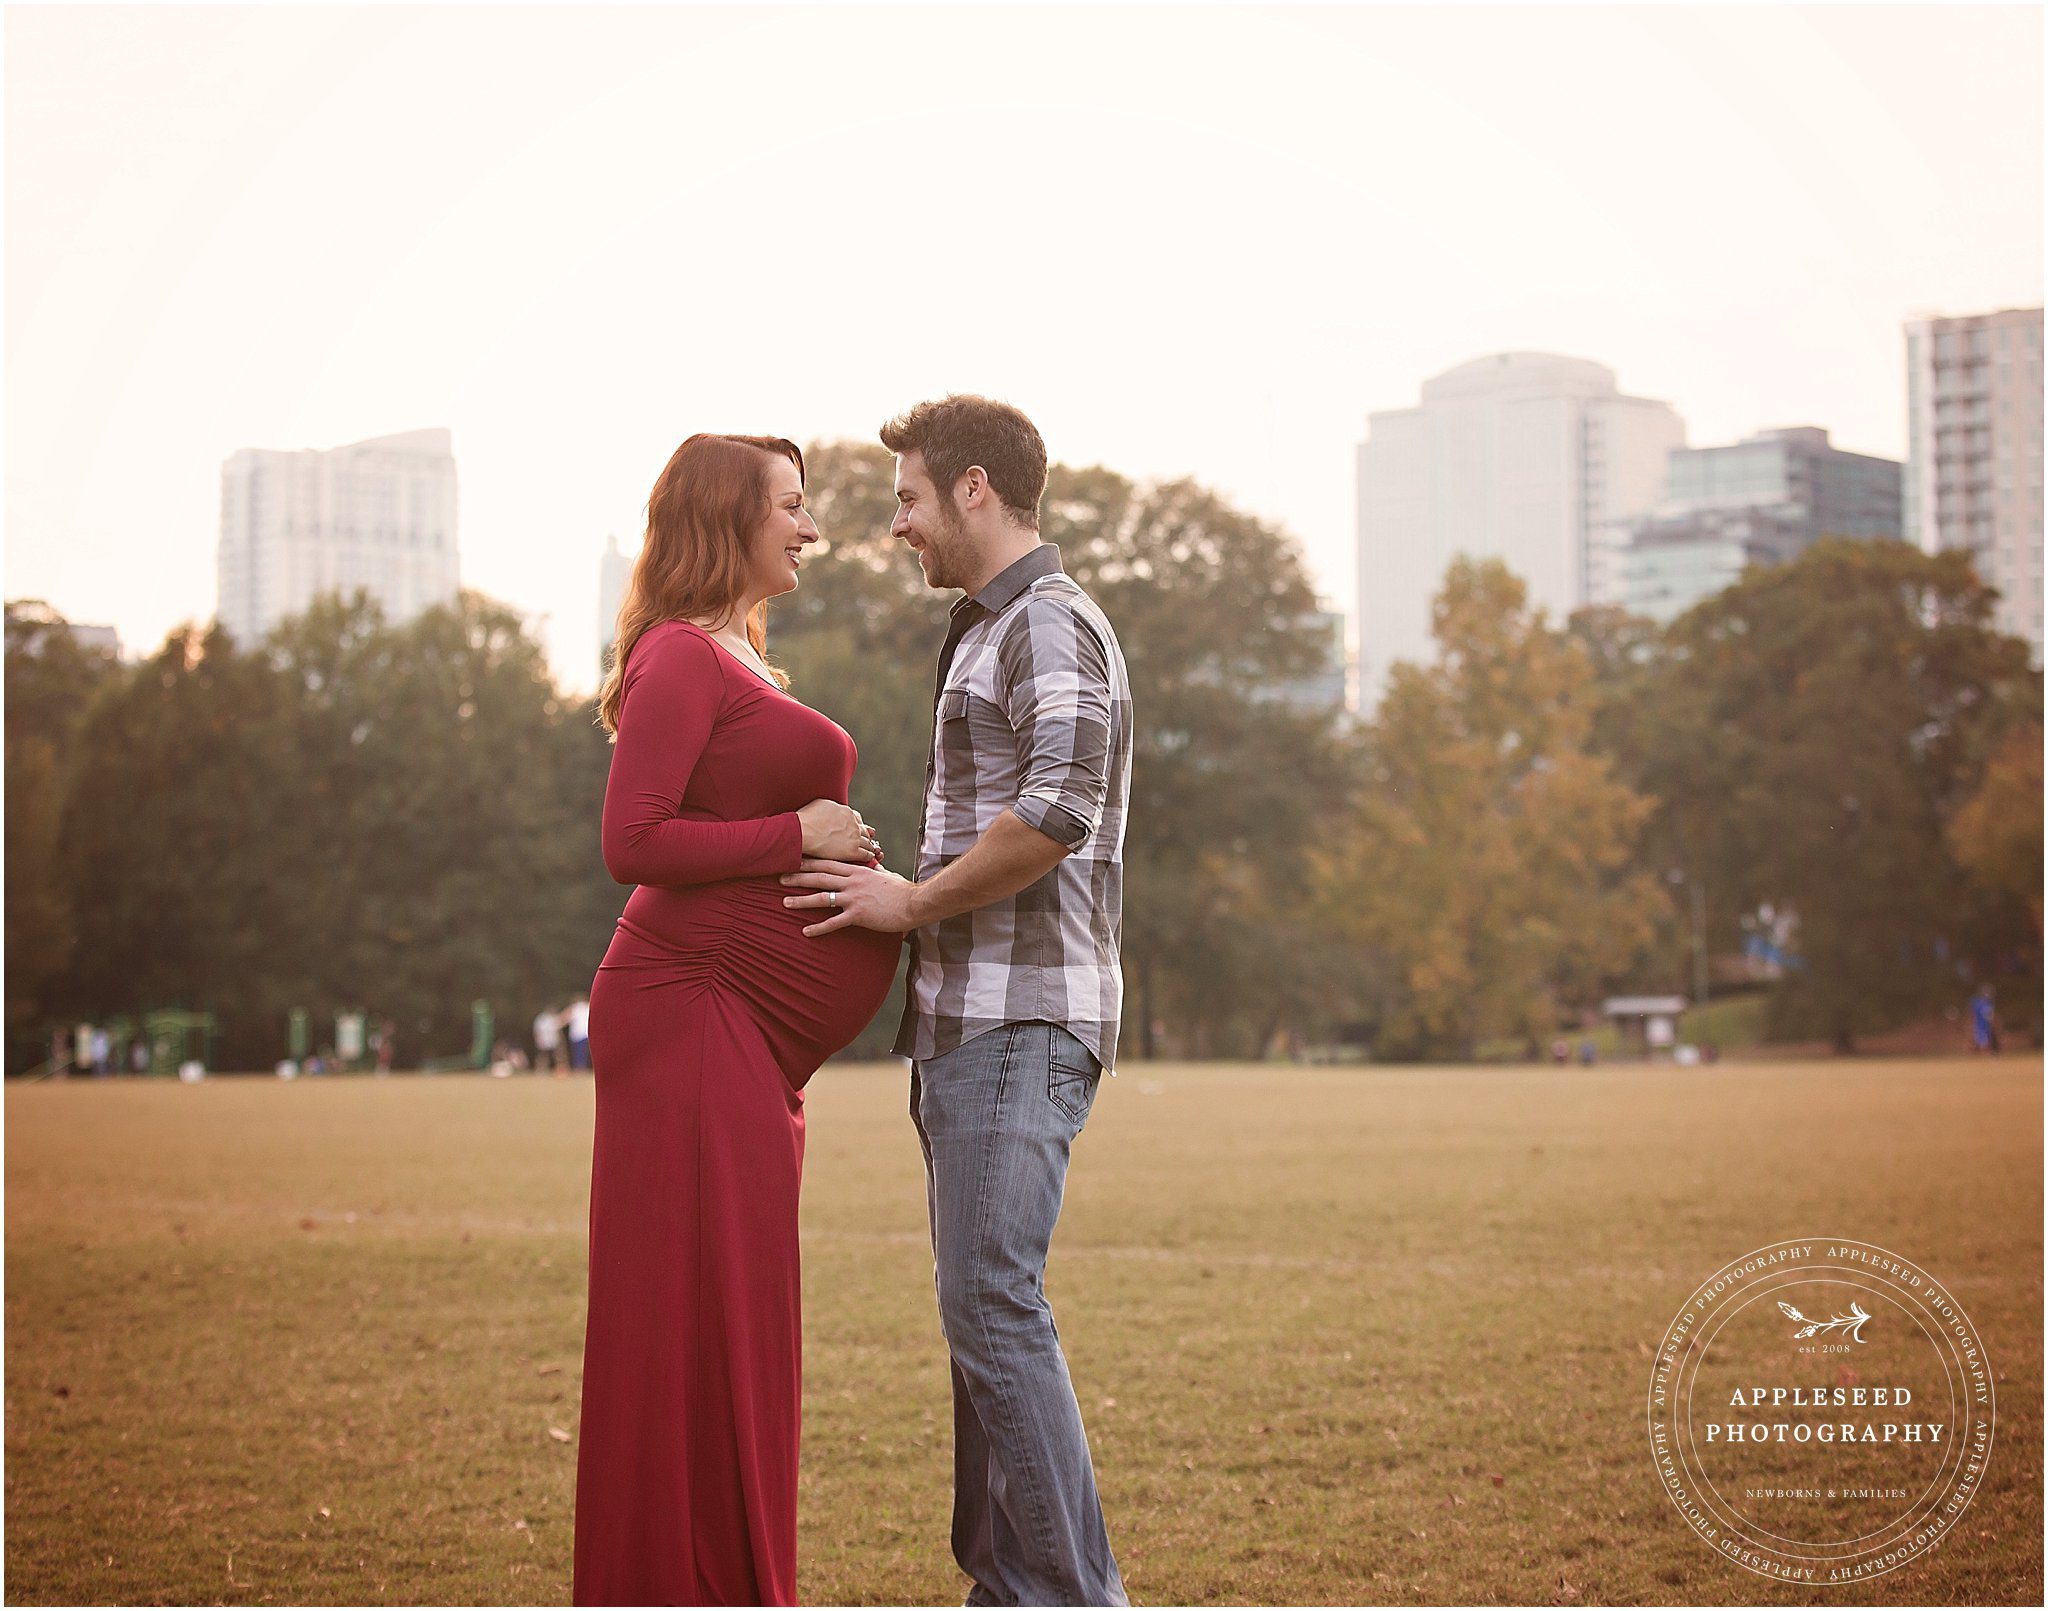 Piedmont Park Maternity Photos | Appleseed Photography